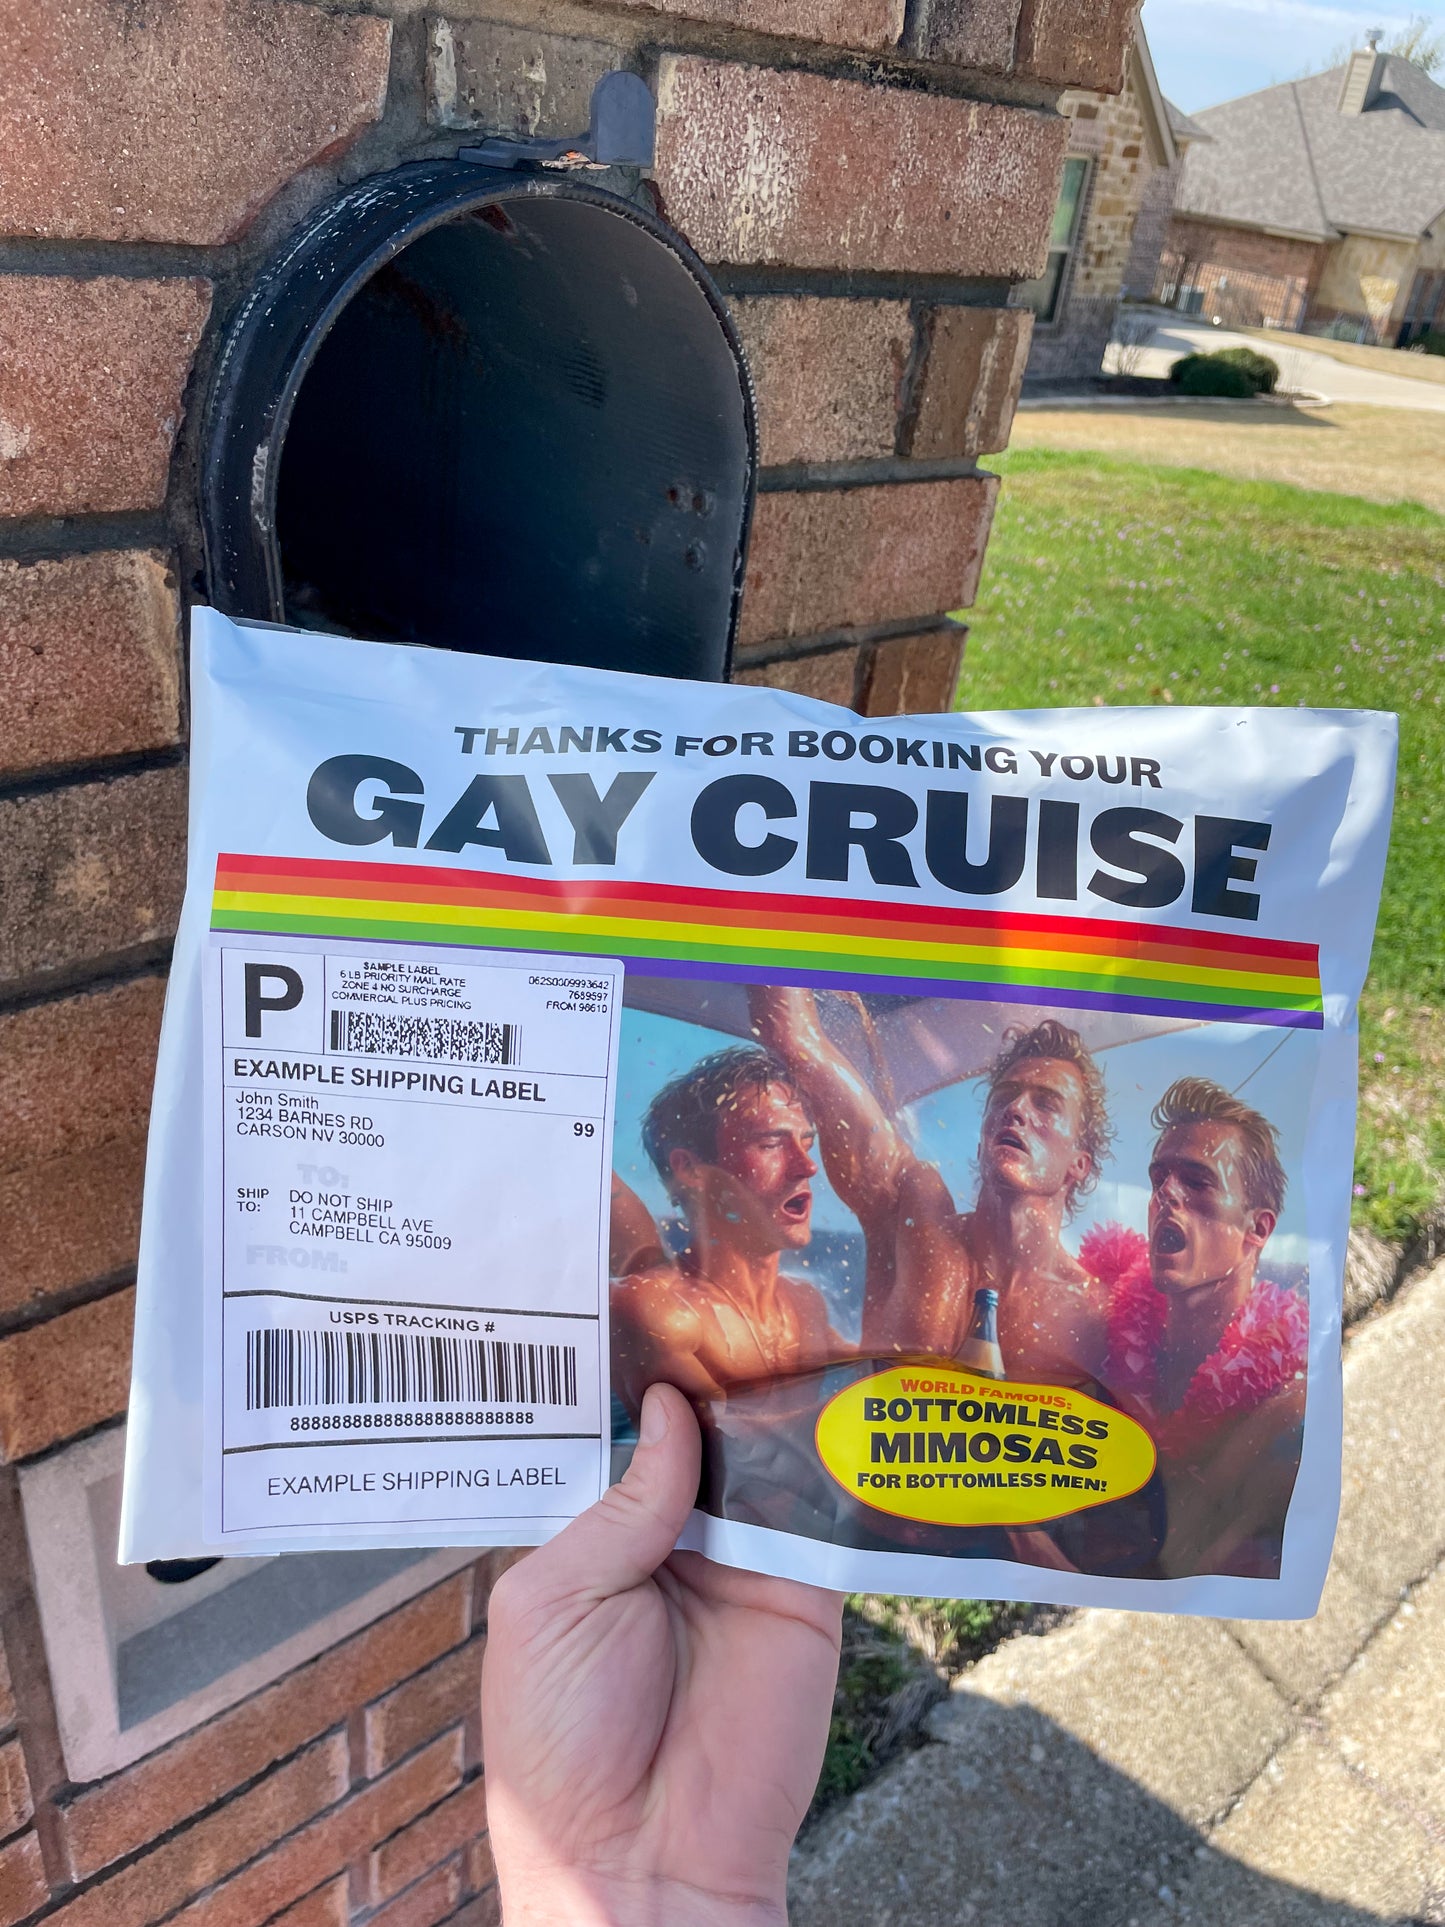 POV of mailman delivering the Gay Cruise mail prank anonymously to someone's mailbox.